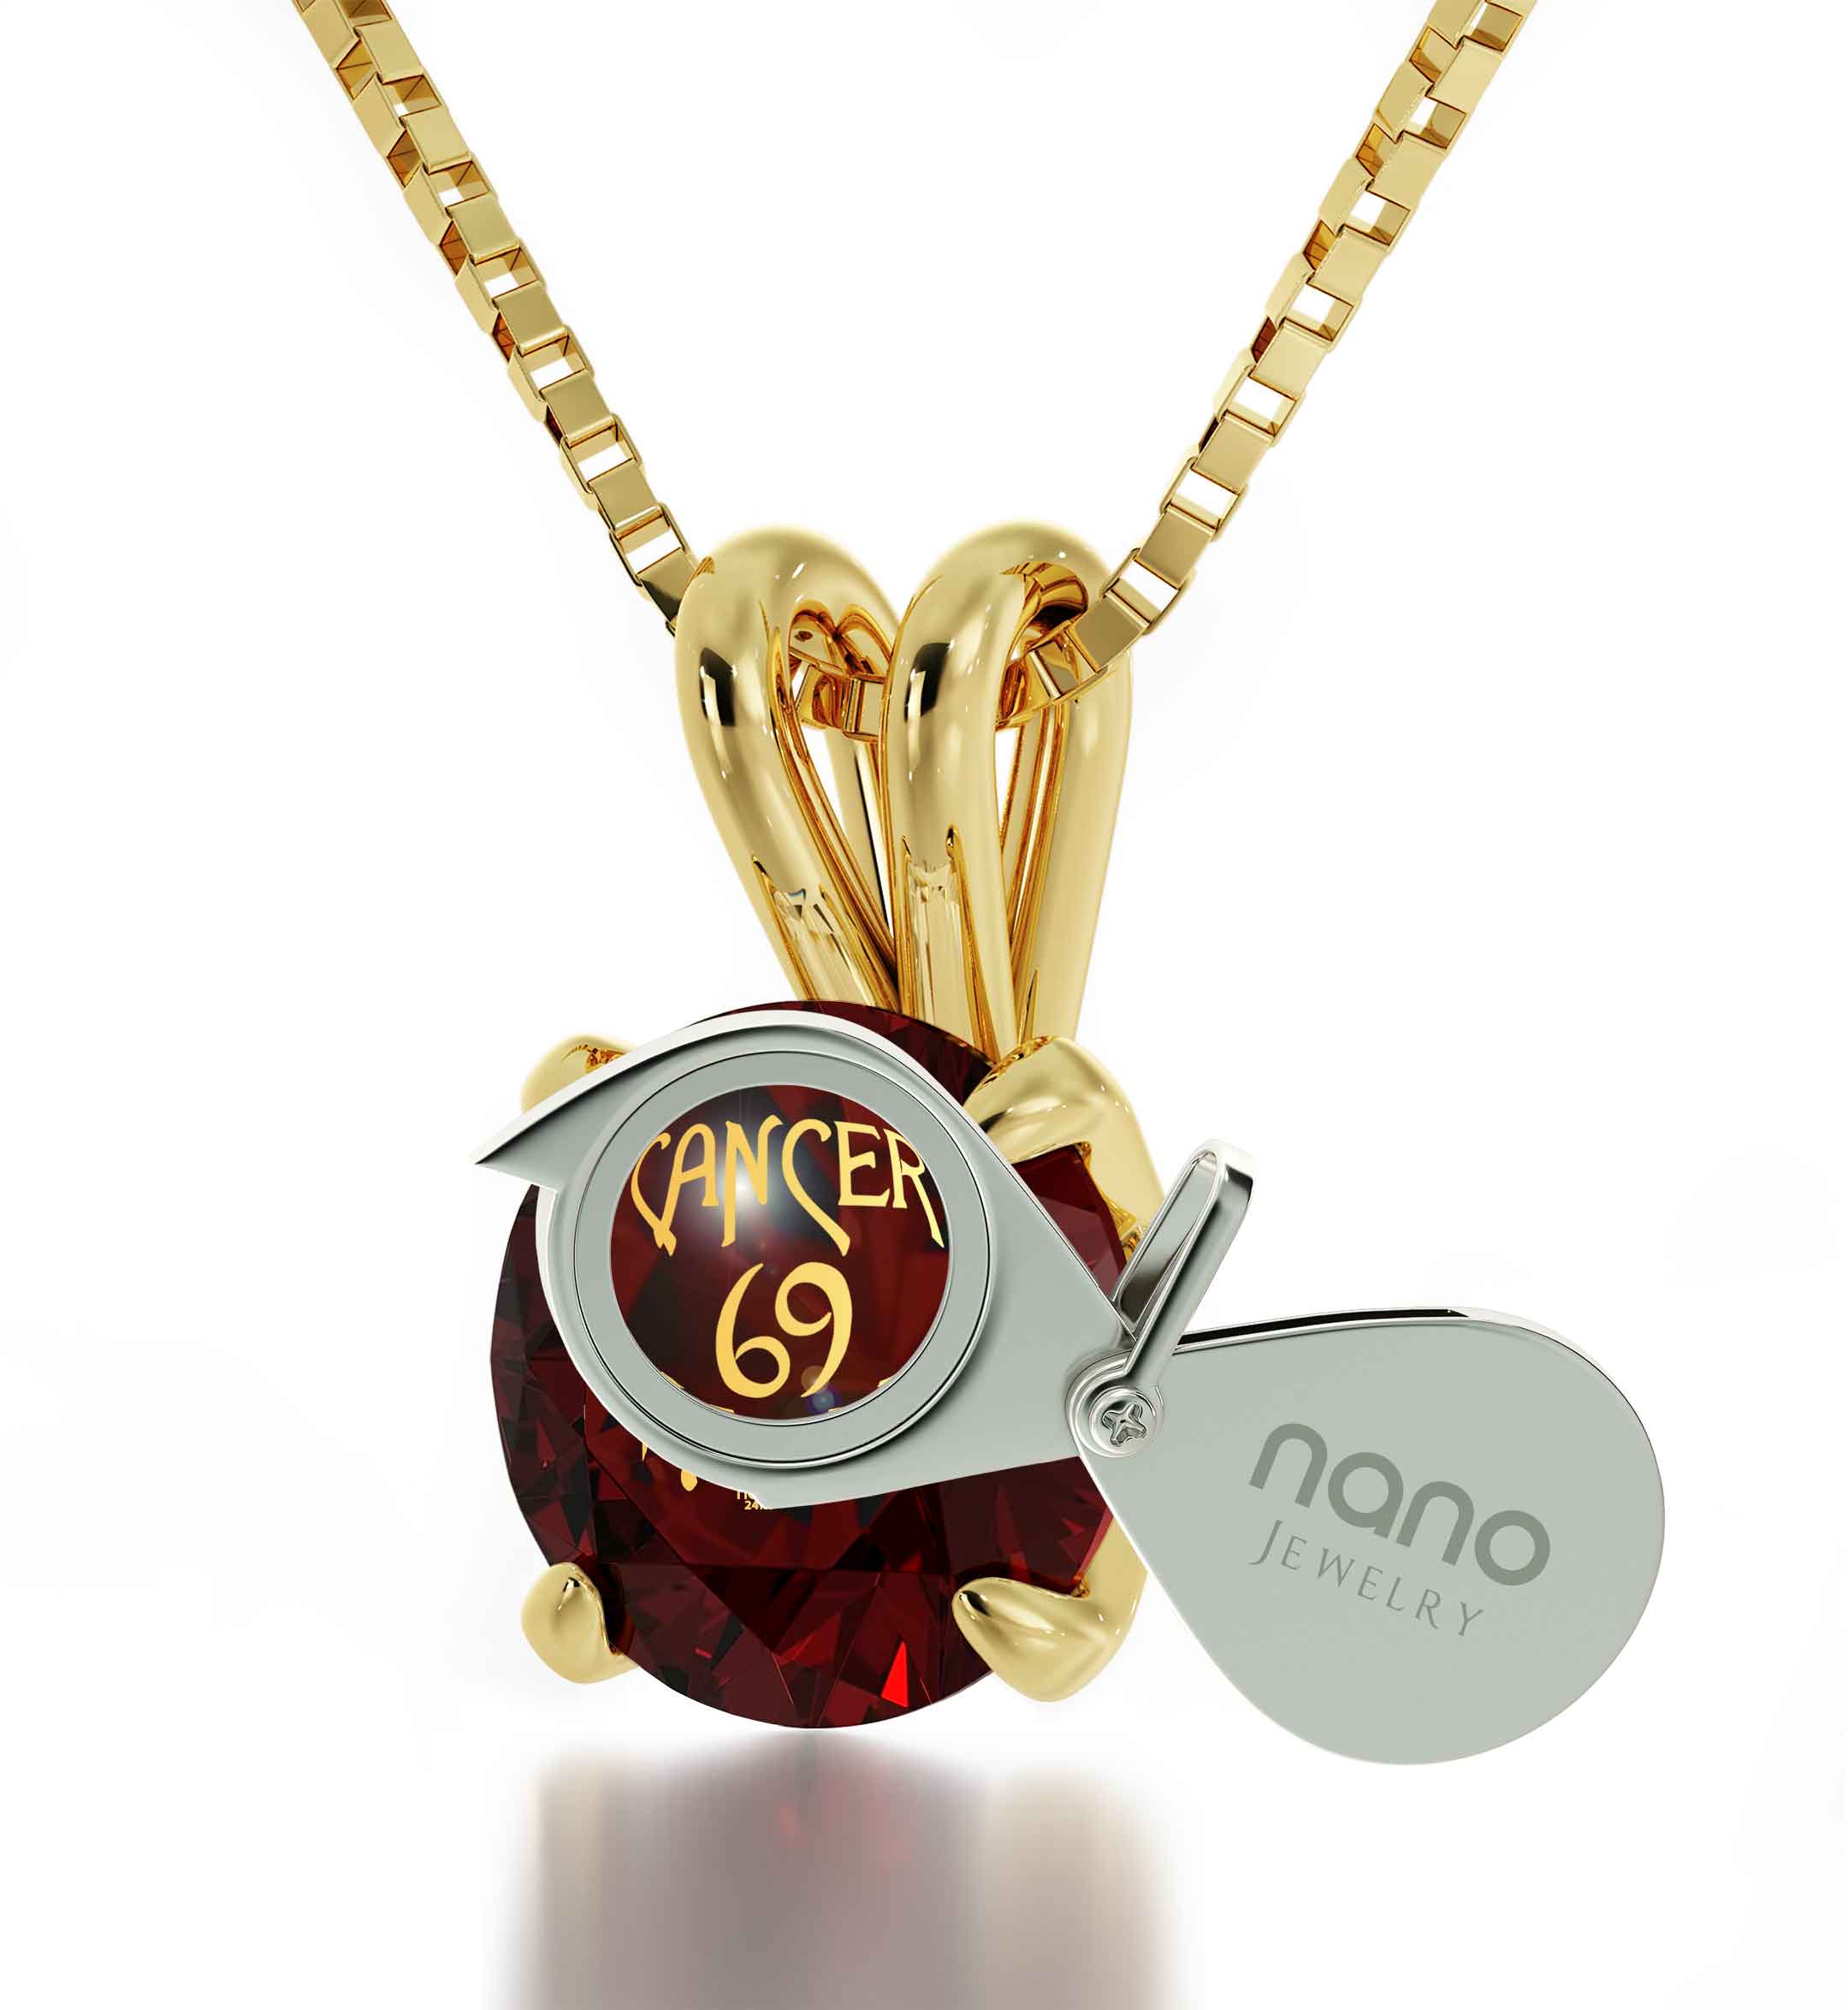 Gold Plated Silver Cancer Necklace Zodiac Pendant with 24k Gold inscribed on Crystal and an attached "nano jewelry" tag on a gold chain.